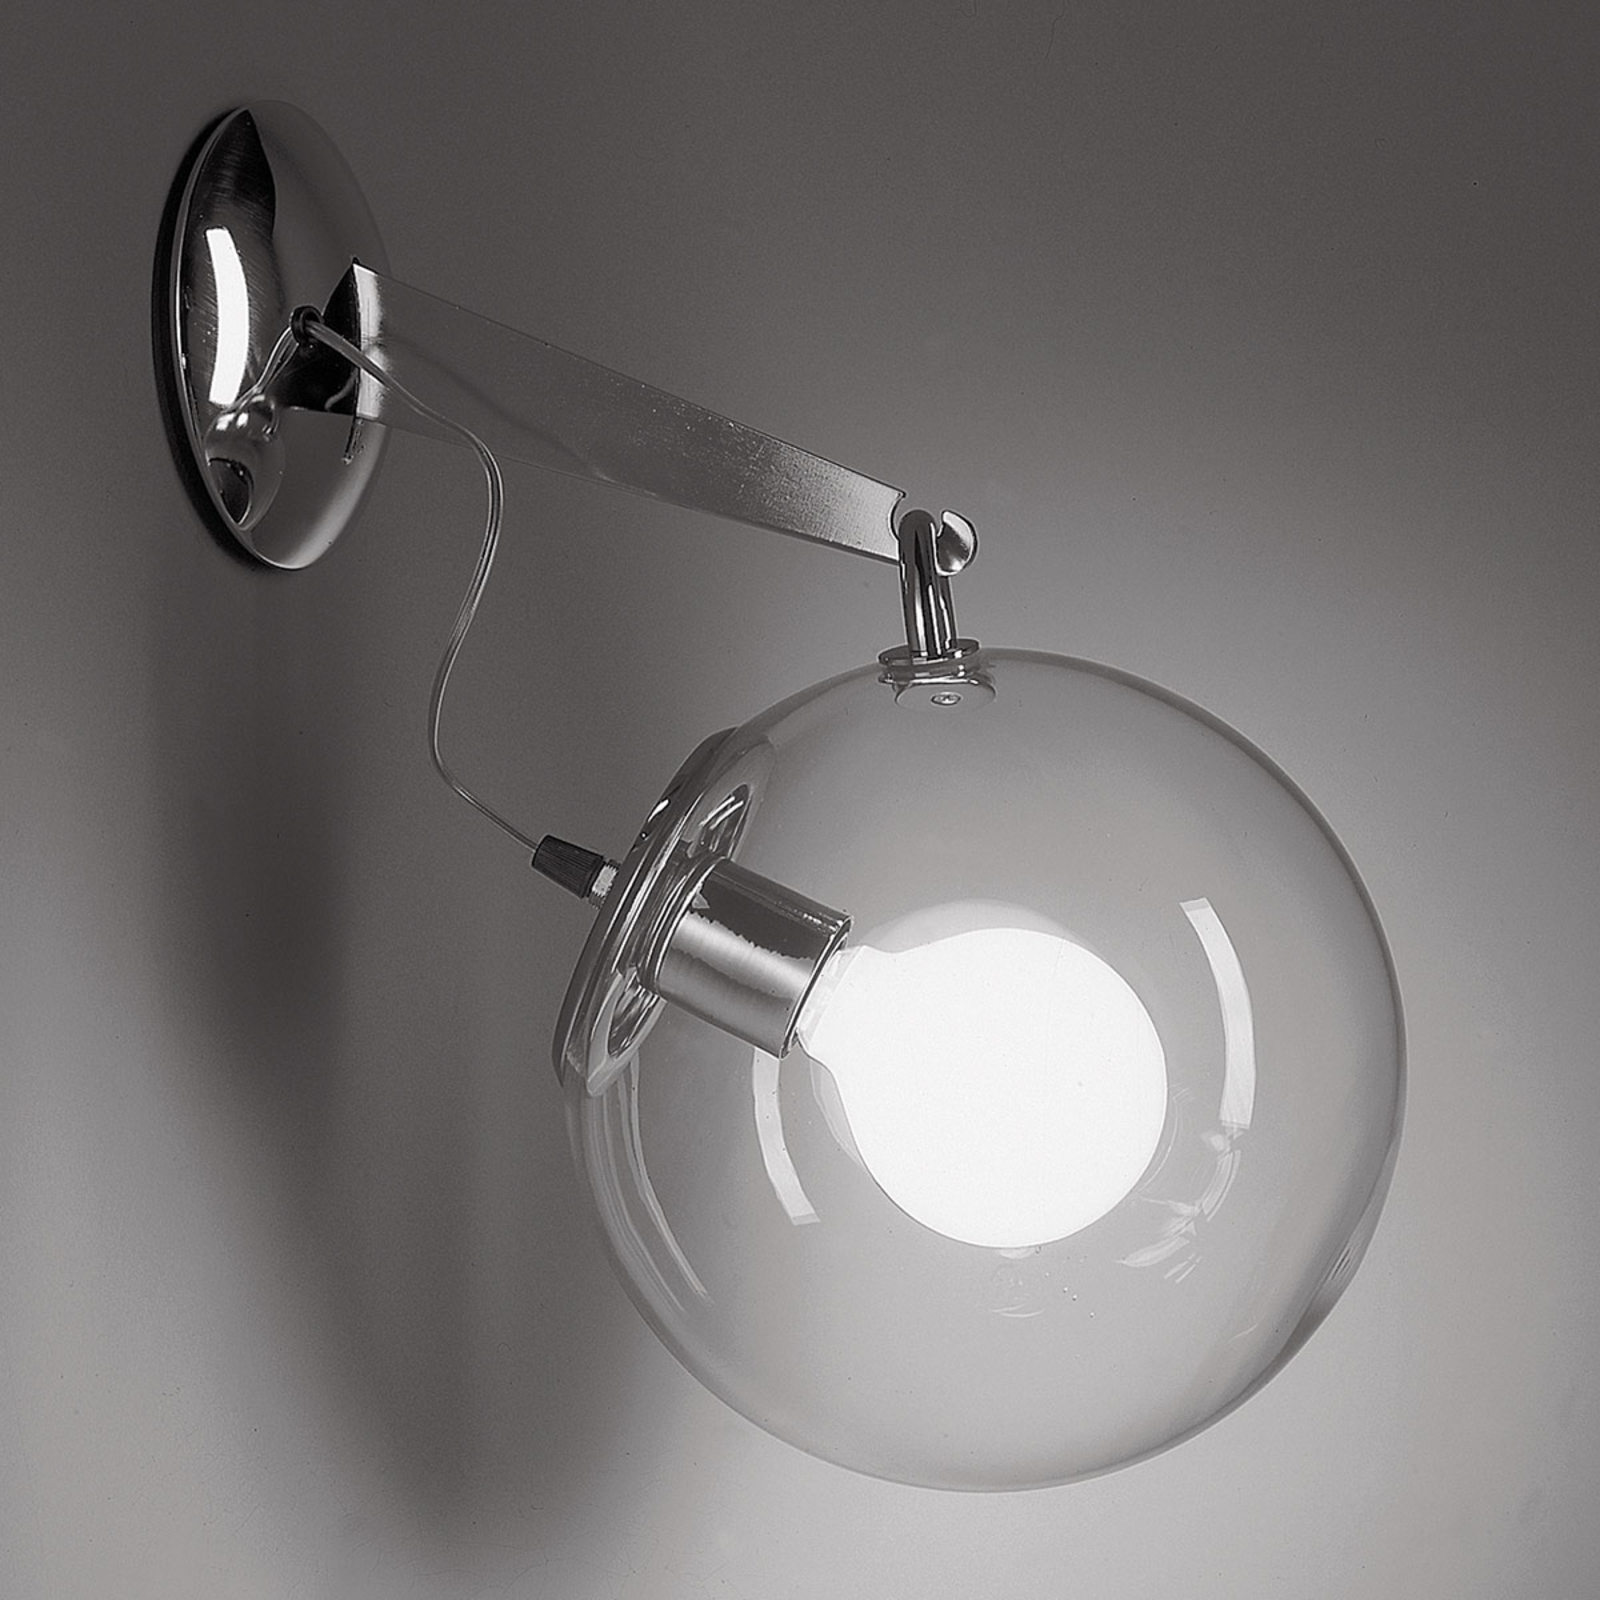 Artemide Miconos glass wall light in chrome